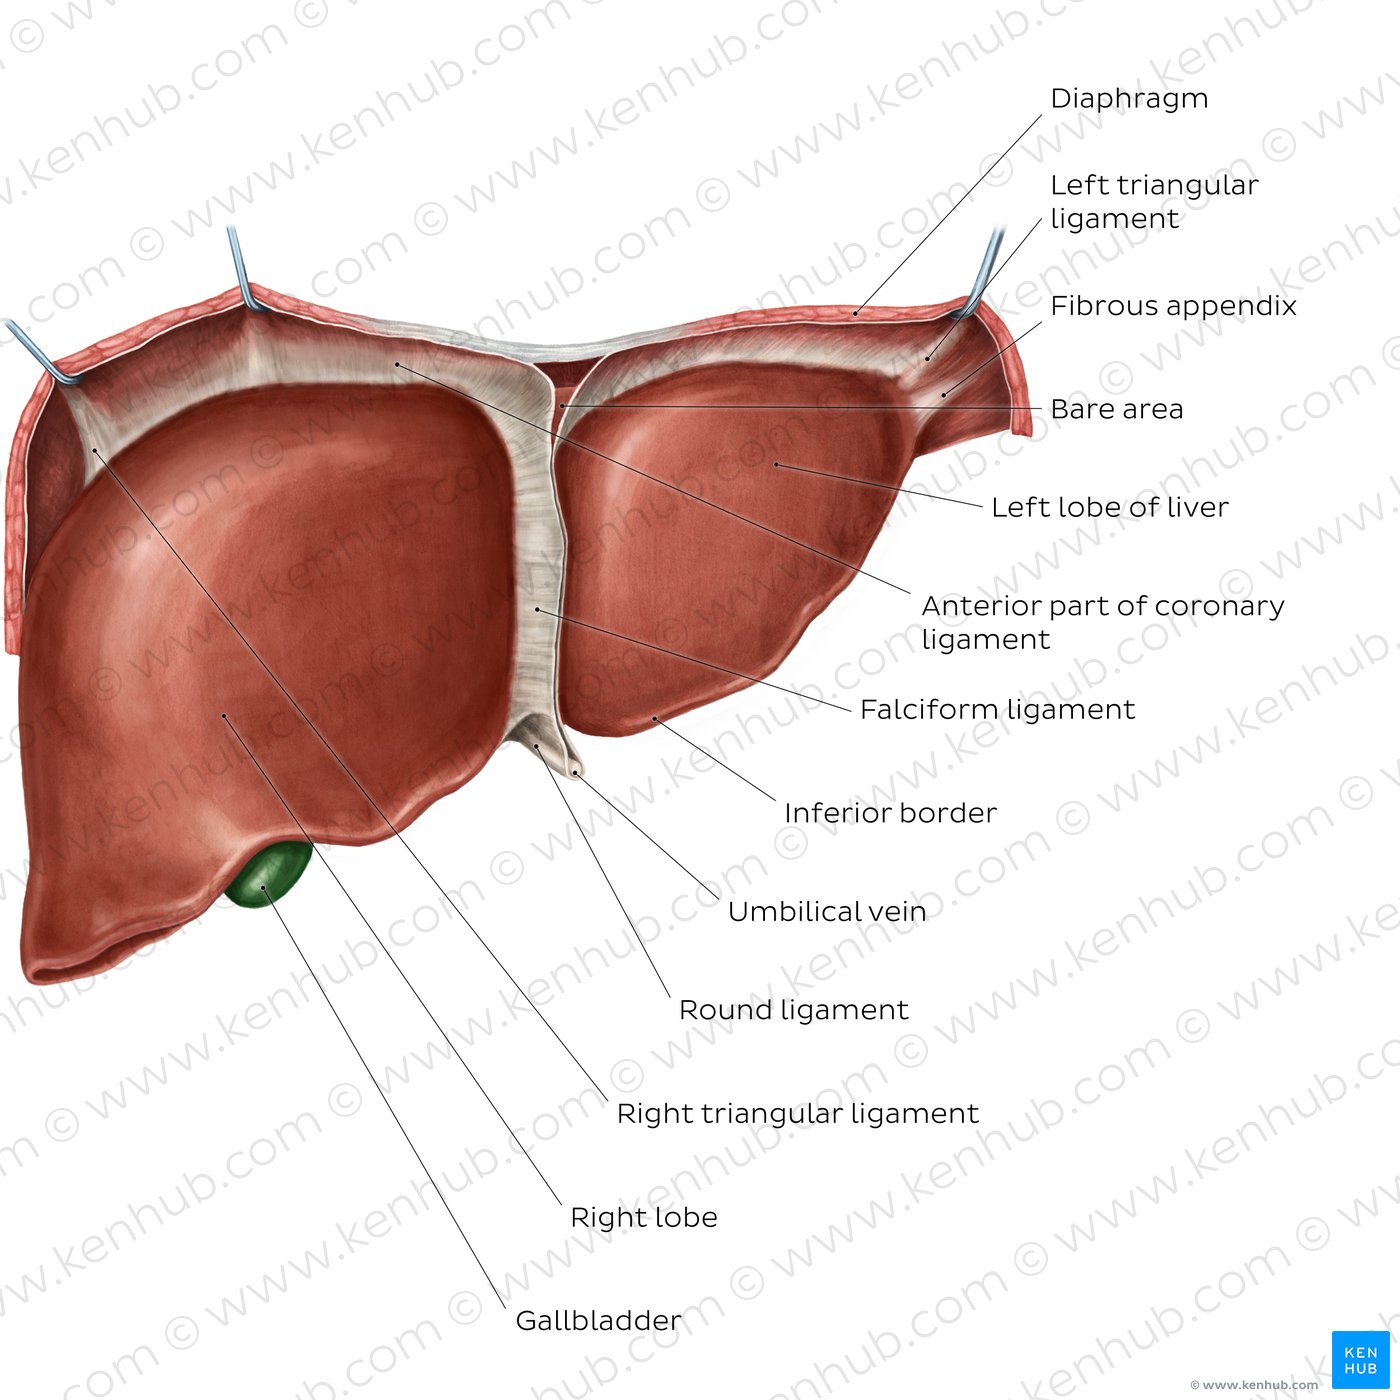 Liver and gallbladder: Anatomy, location and functions | Kenhub